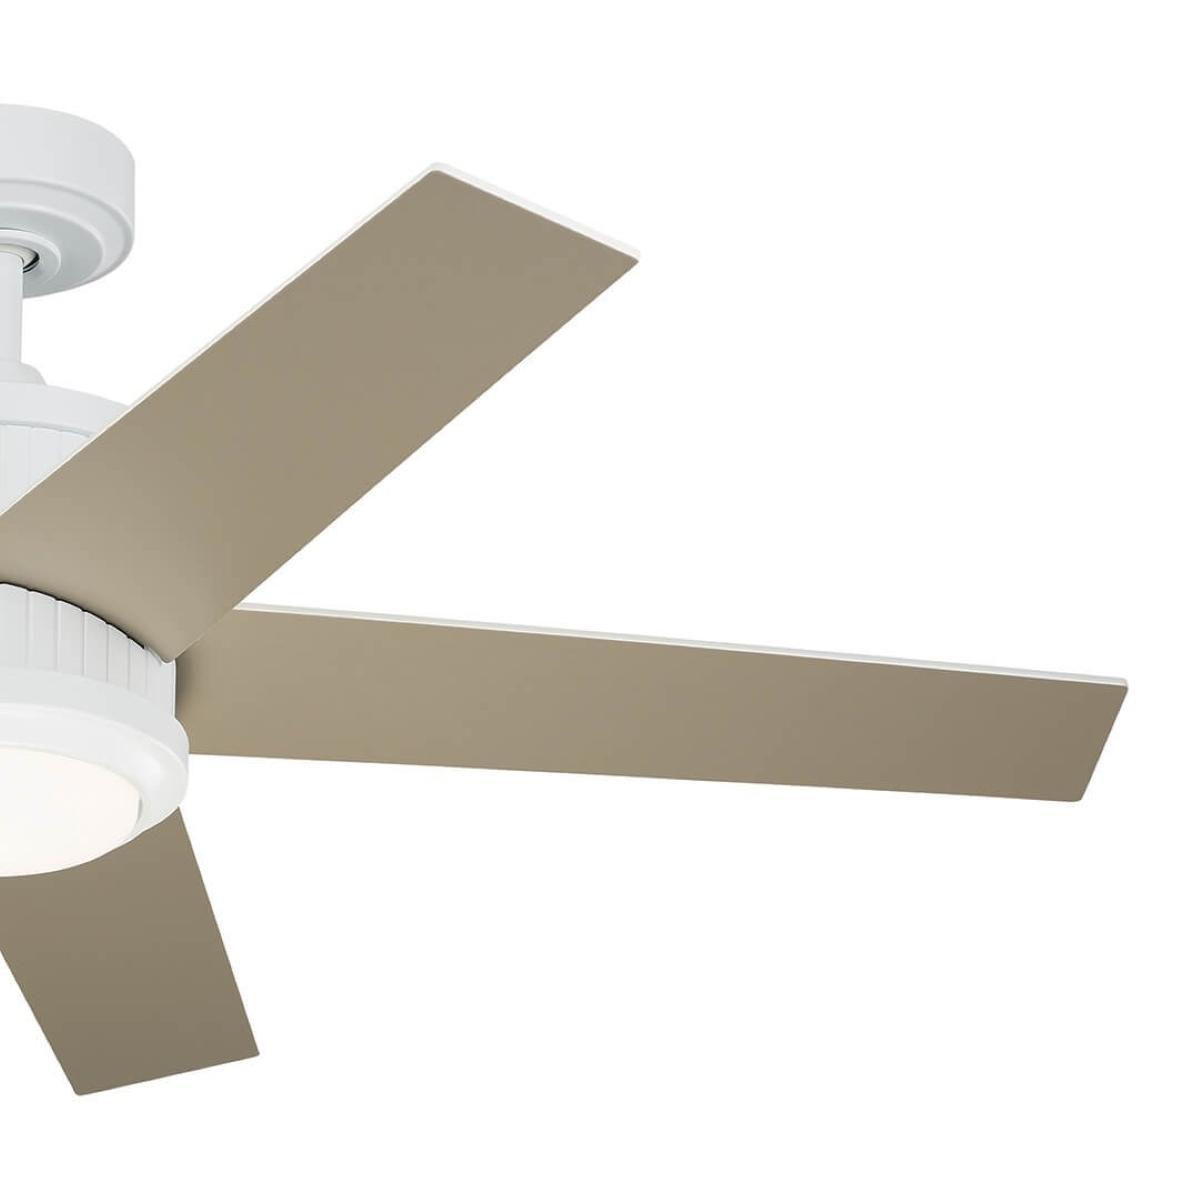 Brahm 48 Inch Modern Propeller Ceiling Fan With Light And Remote